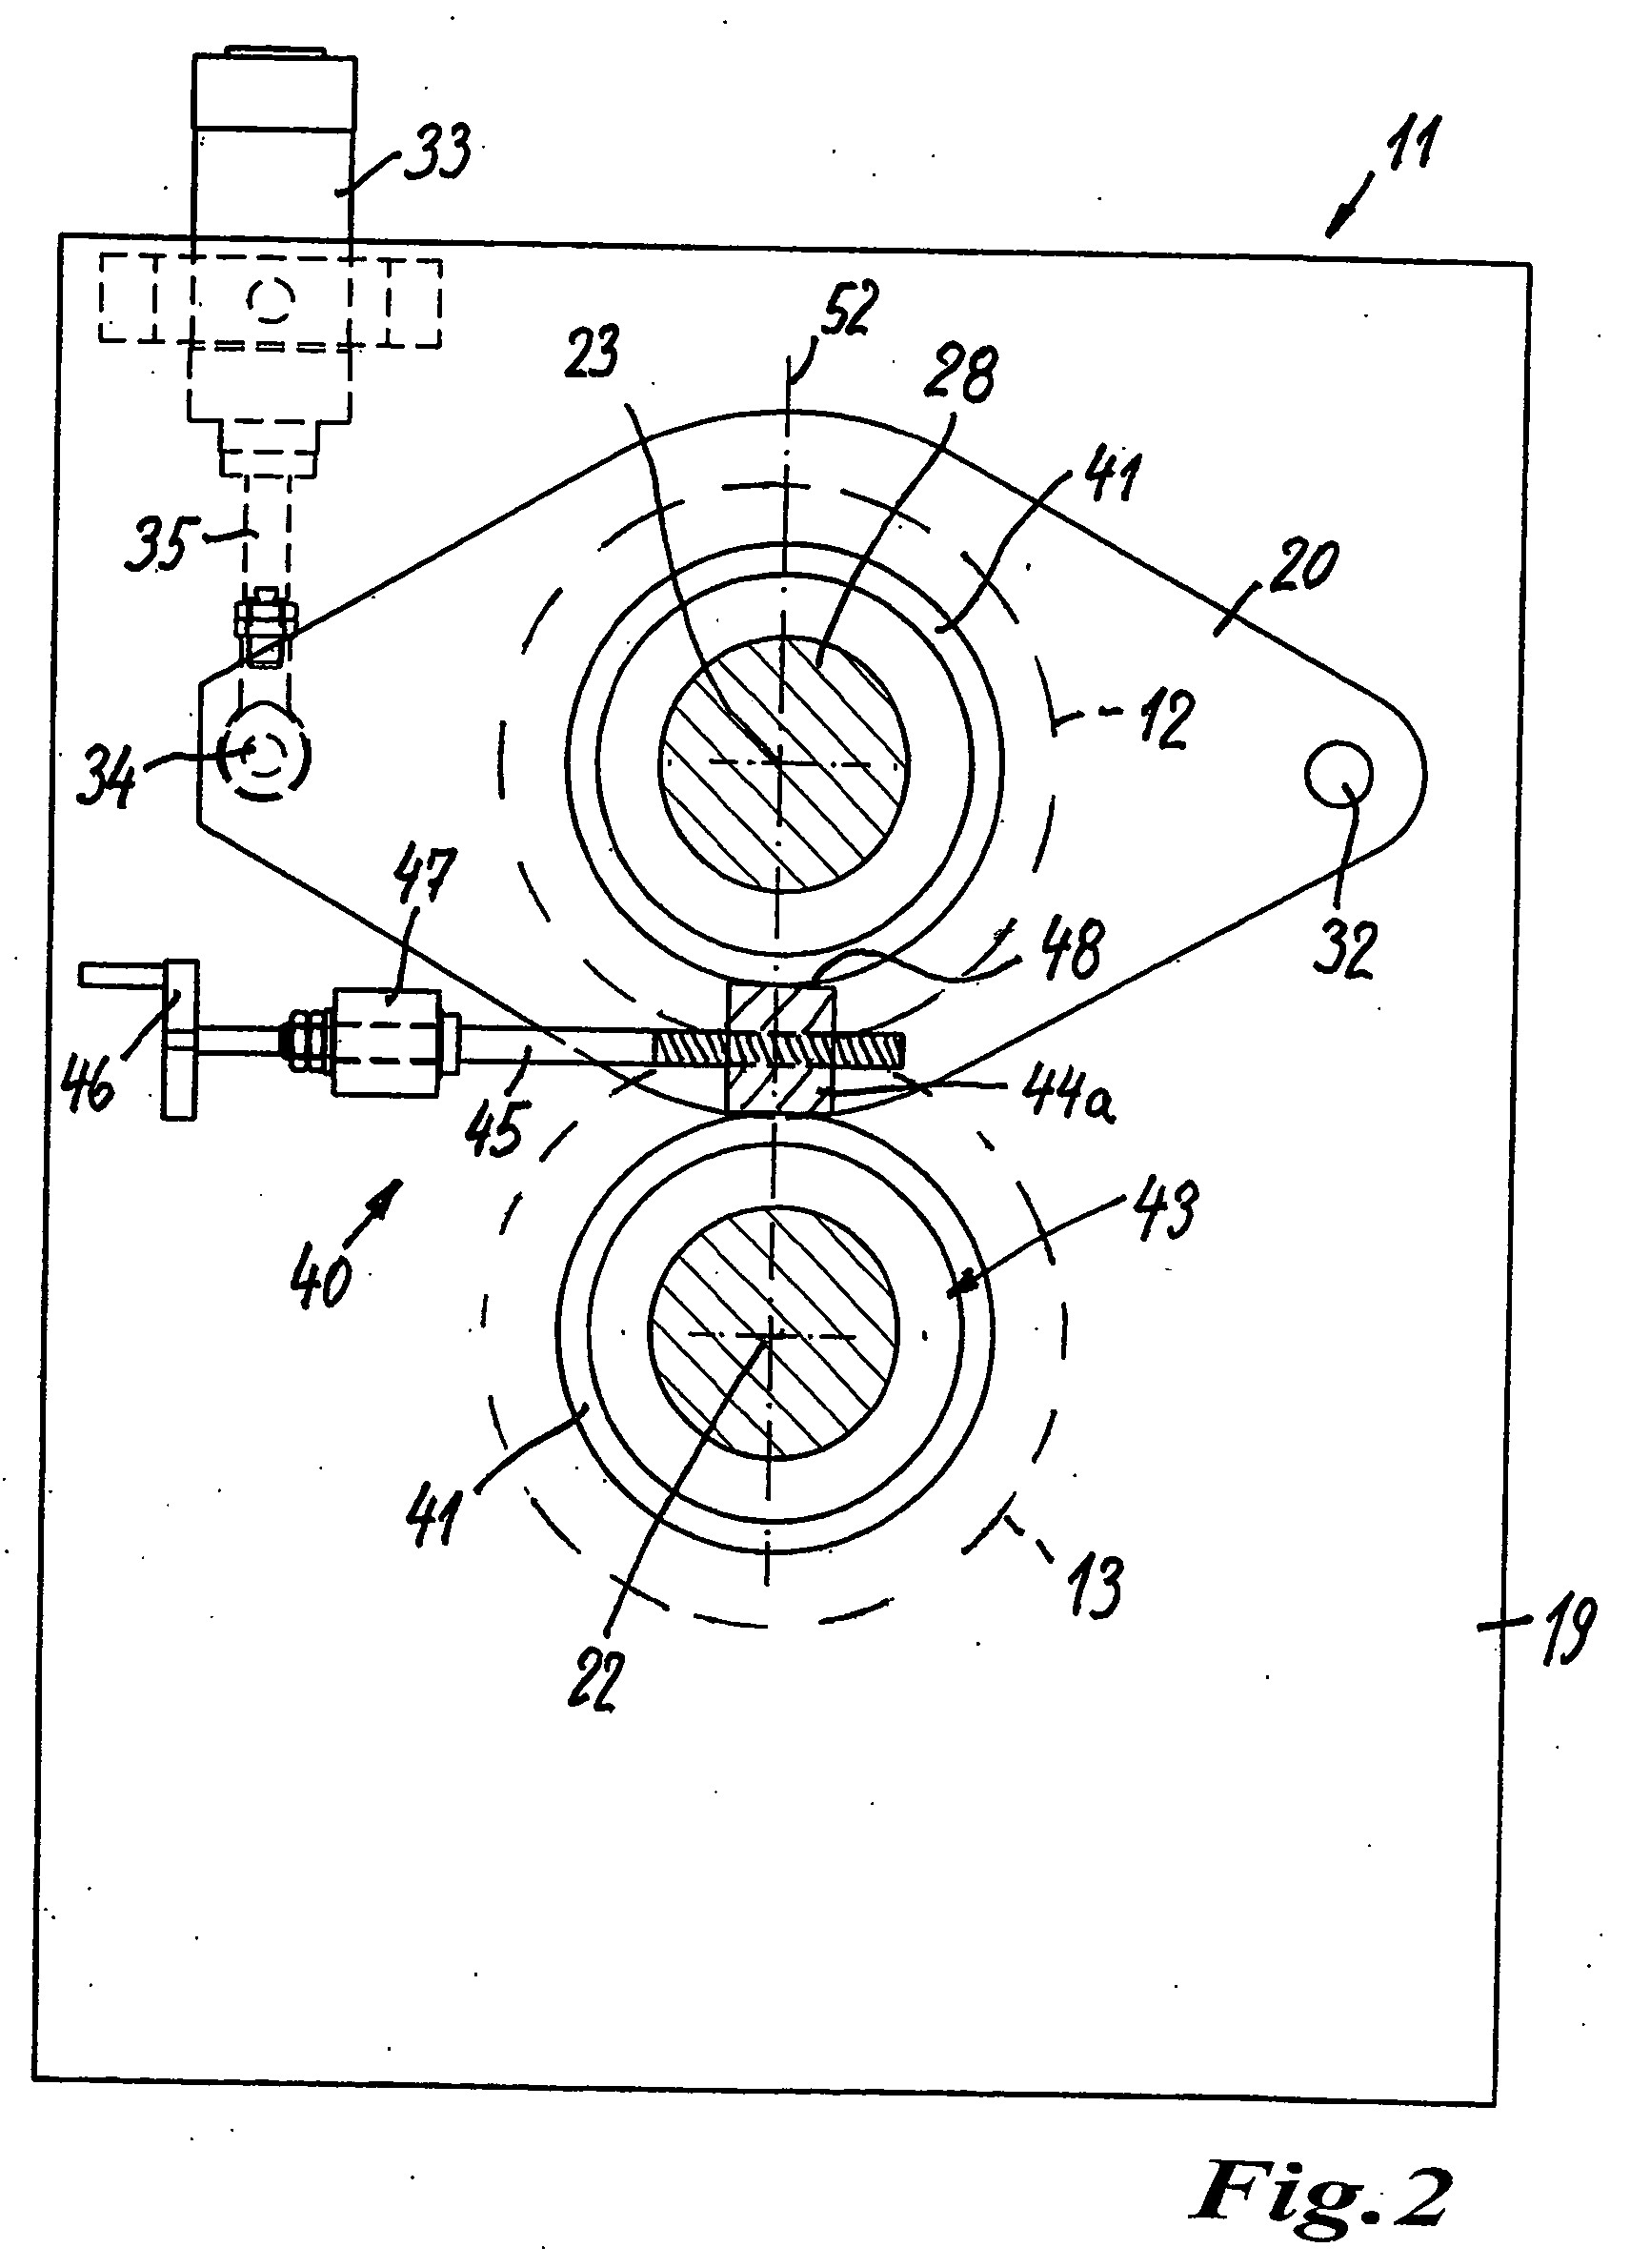 Hot foil stamping or printing device for transferring surface portions onto a flat material